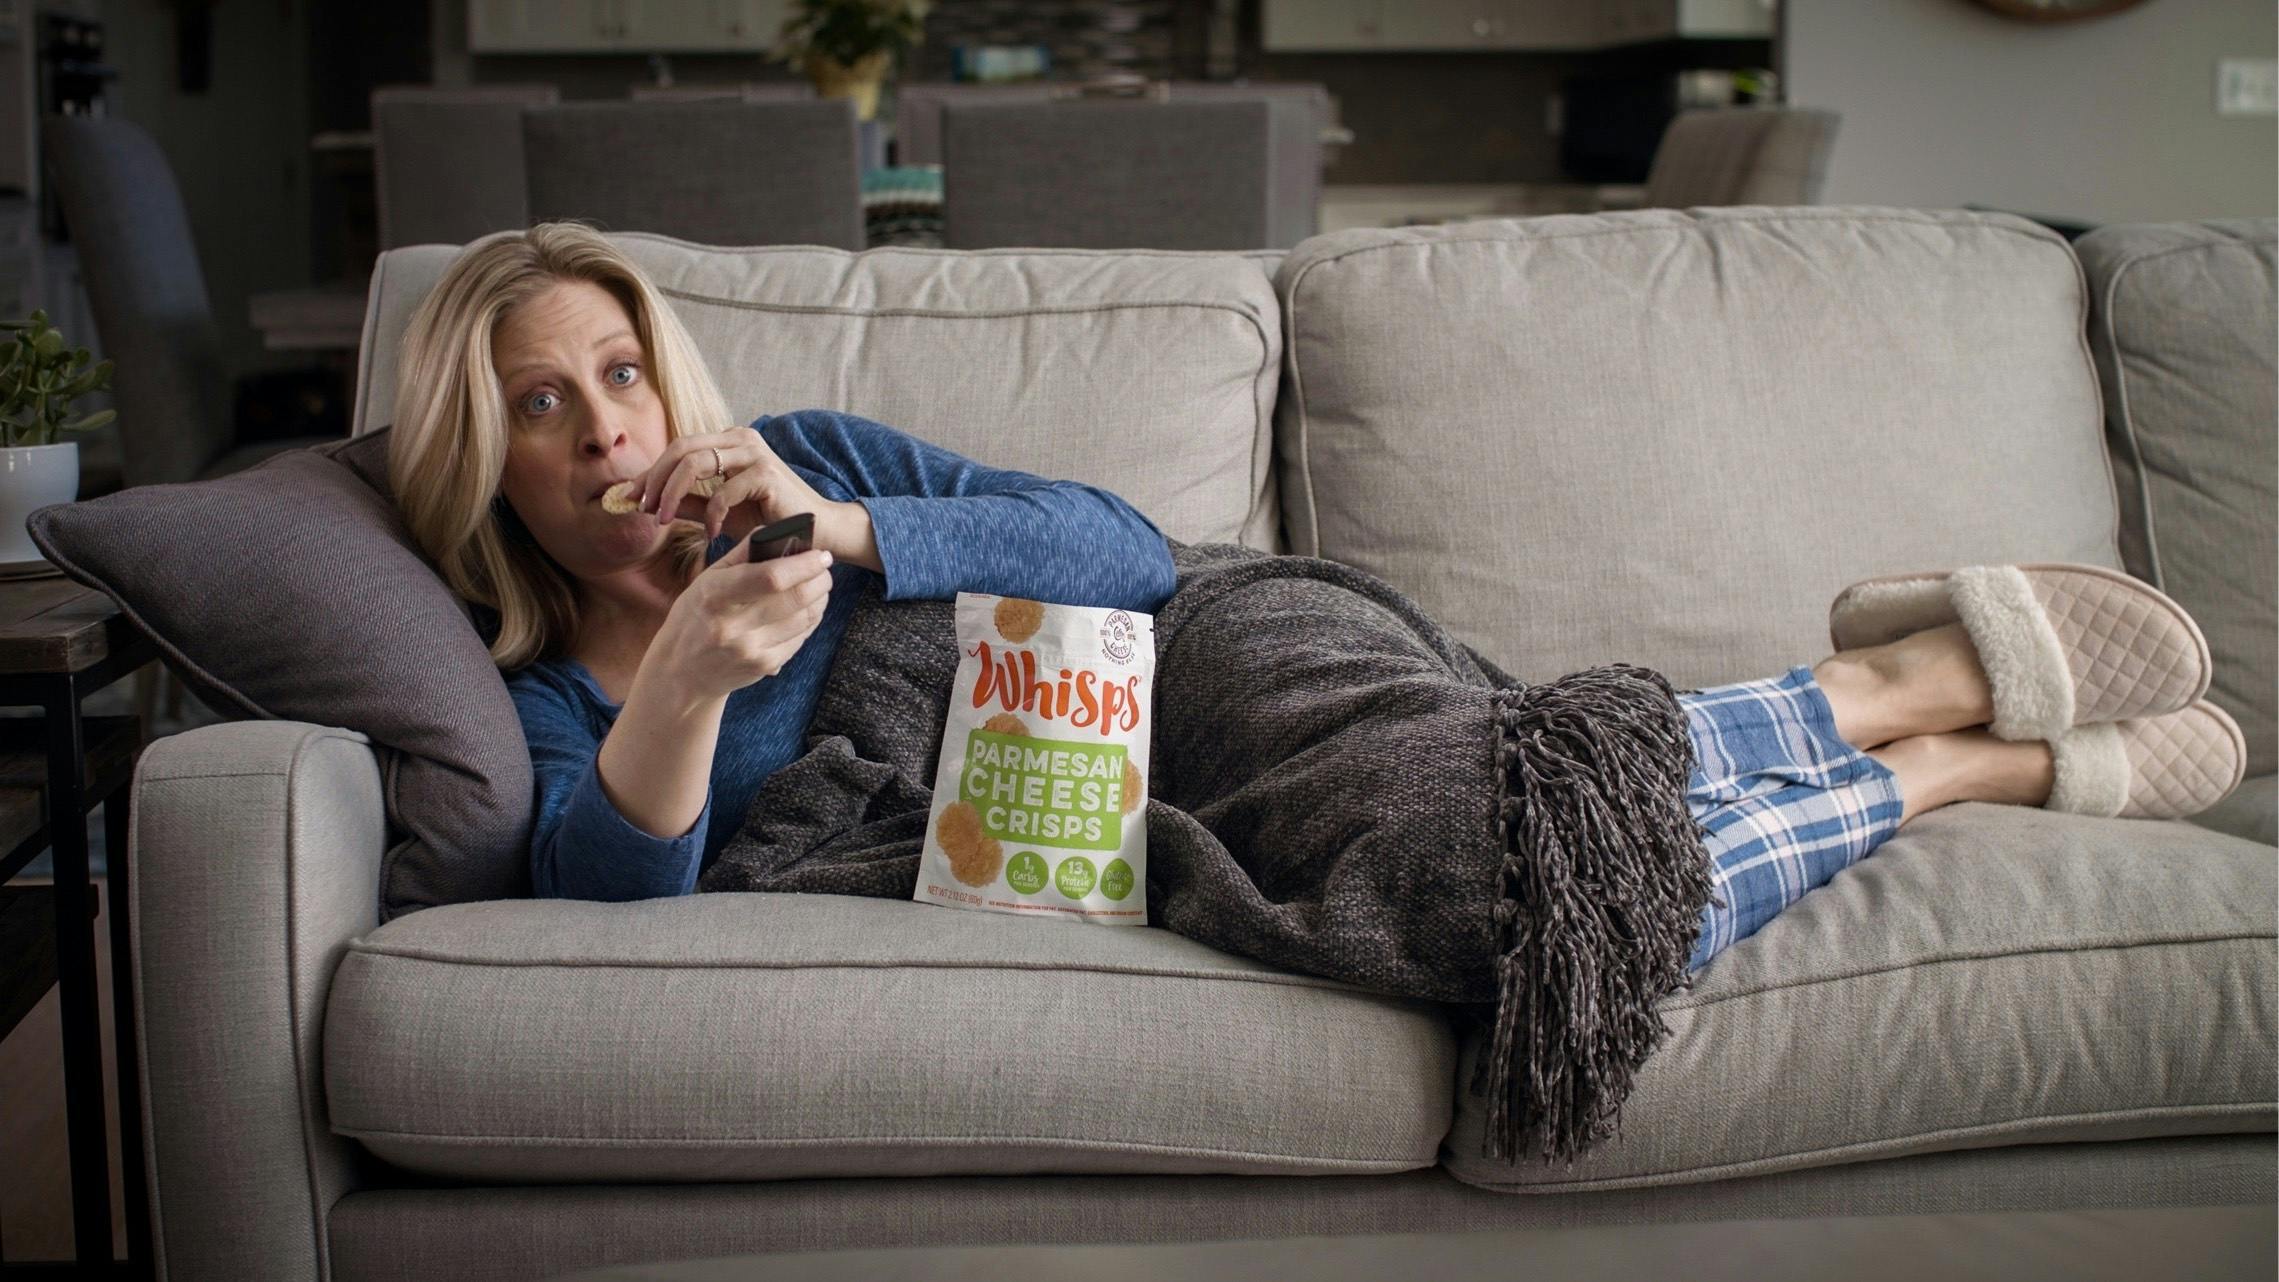 Woman lying on the couch eating Whisps.